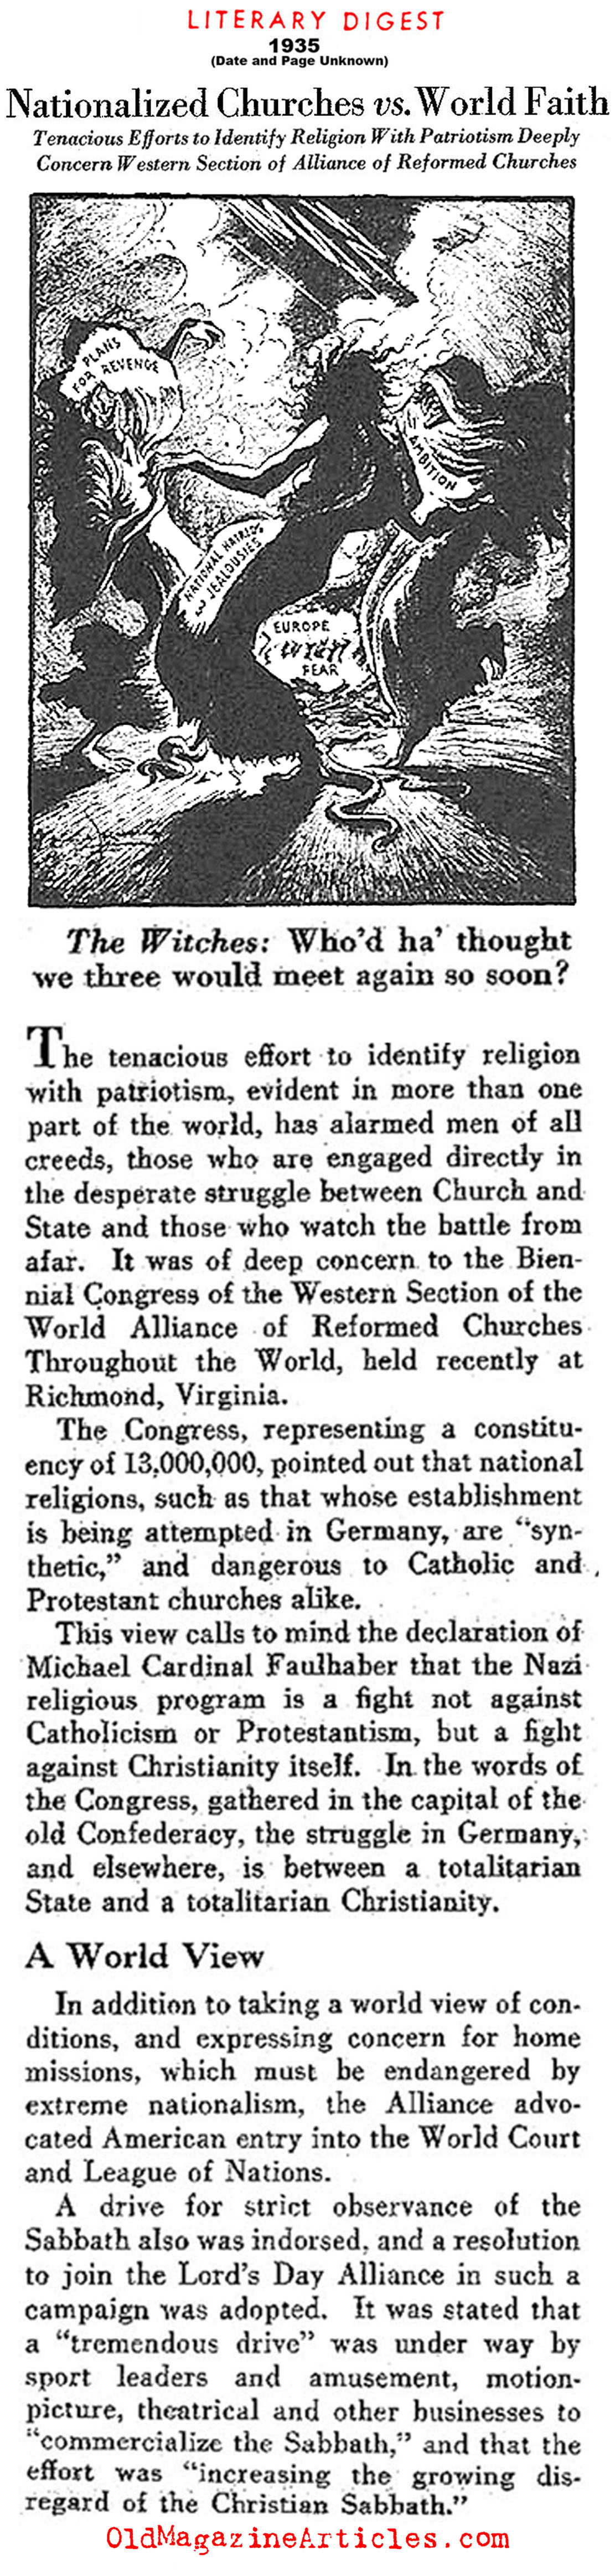 The Era of Nationalized Religions (The Literary Digest, 1935)